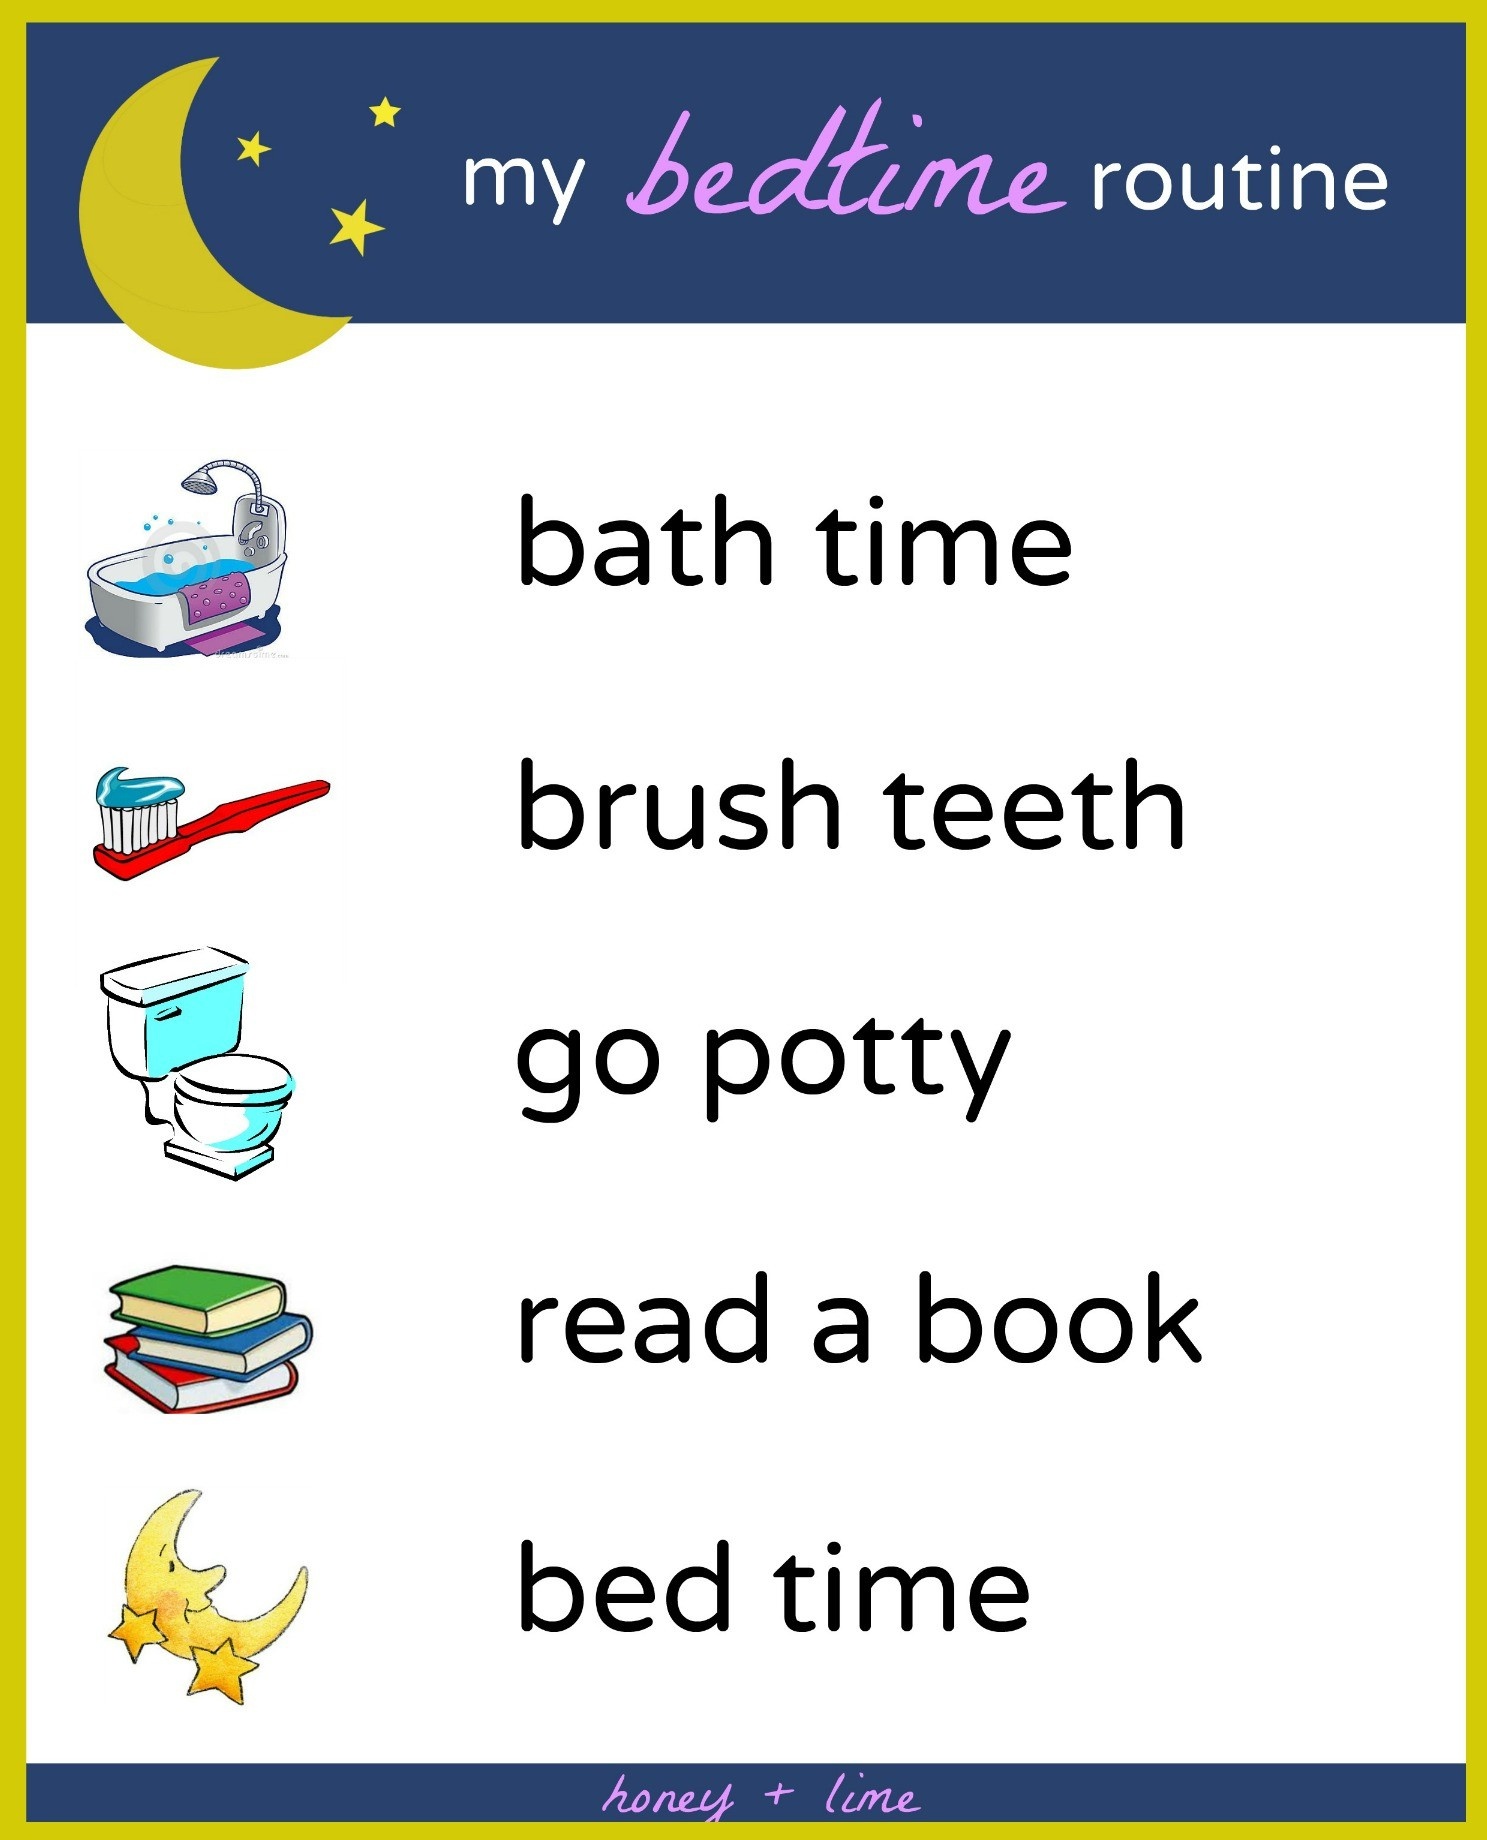 Brush, Book, Bed: A Printable Bedtime Routine Chart For Kids - Free Printable Bedtime Routine Chart